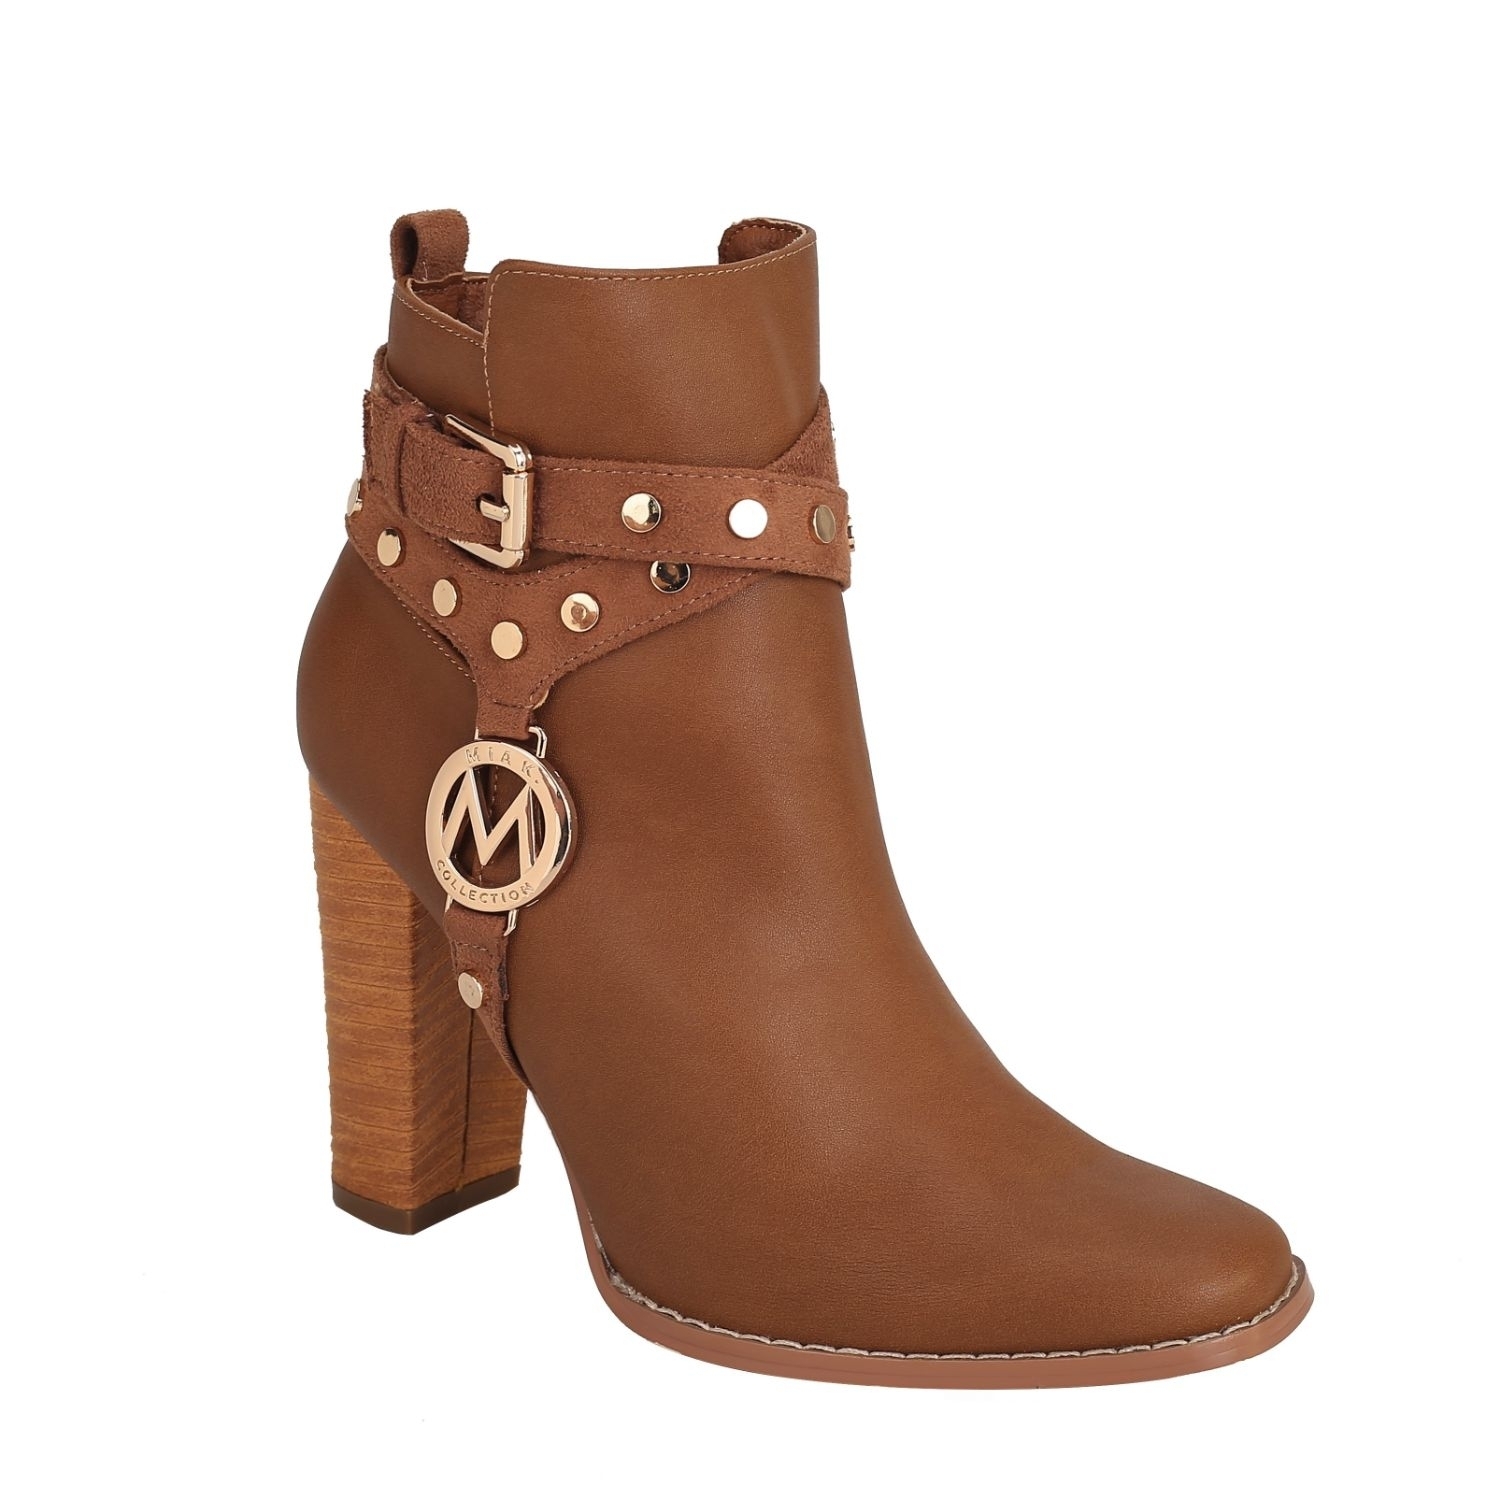 MKF Collection Brooke Ankle Women's Boot With Wide Heel By Mia K - Cognac-6